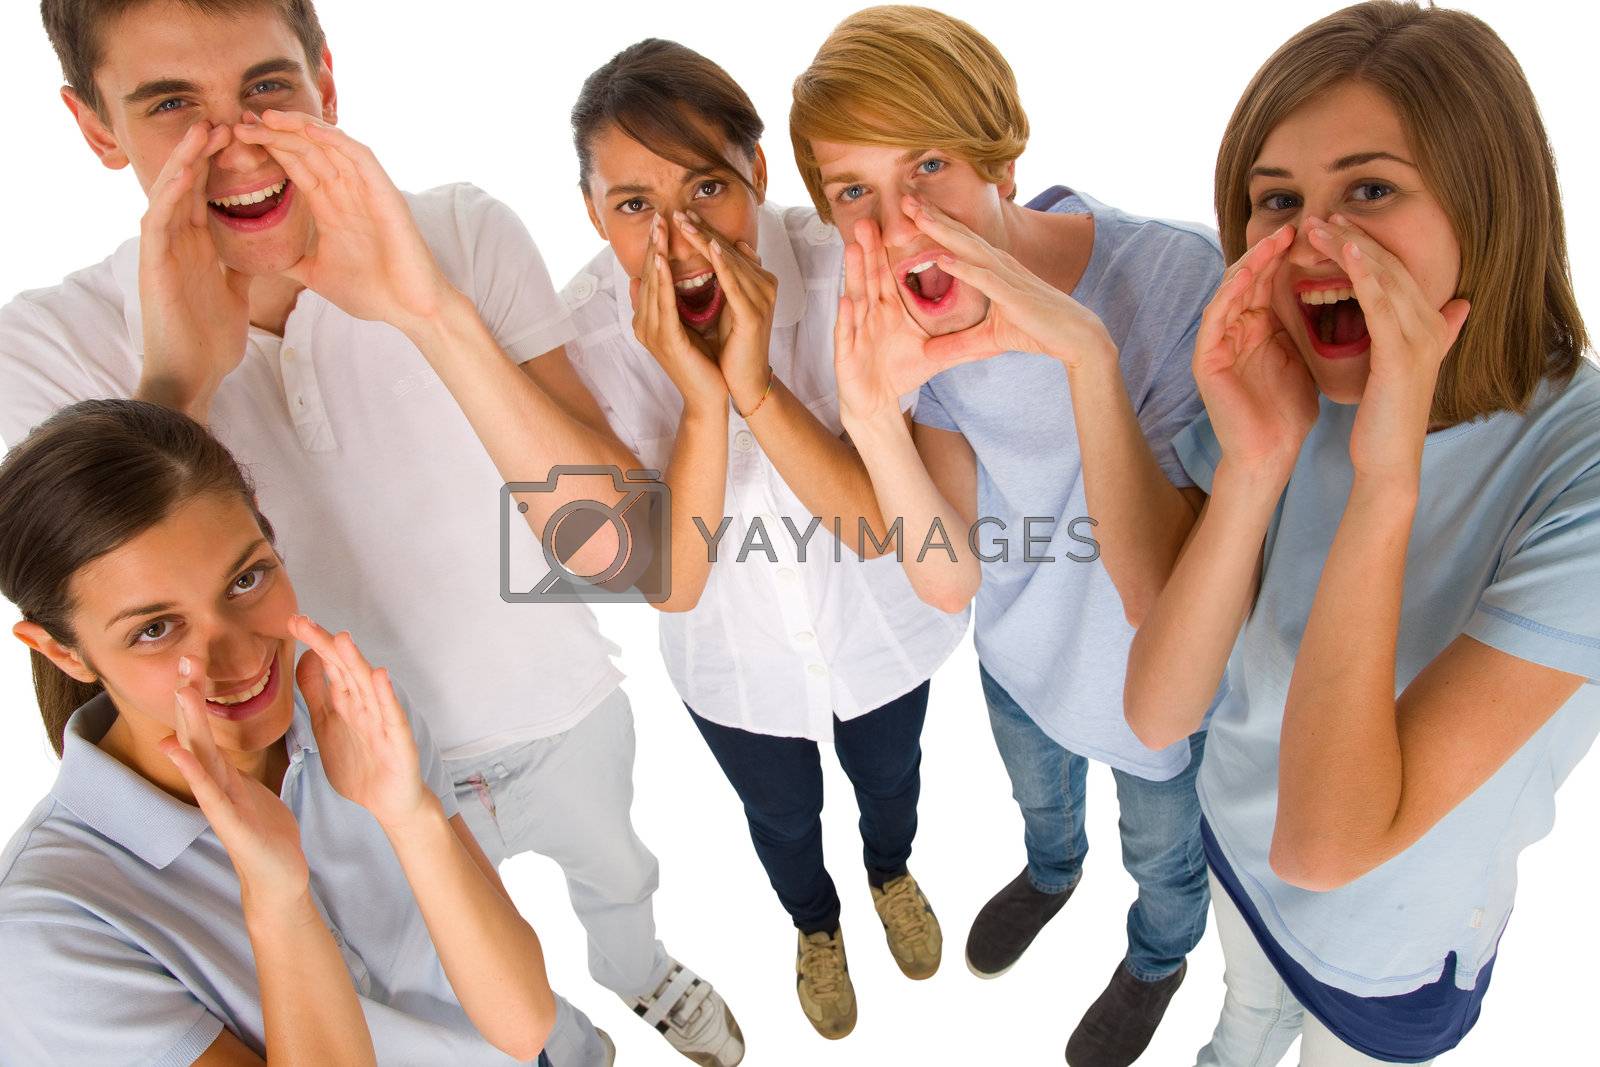 Royalty free image of group of teenagers shouting by ambro